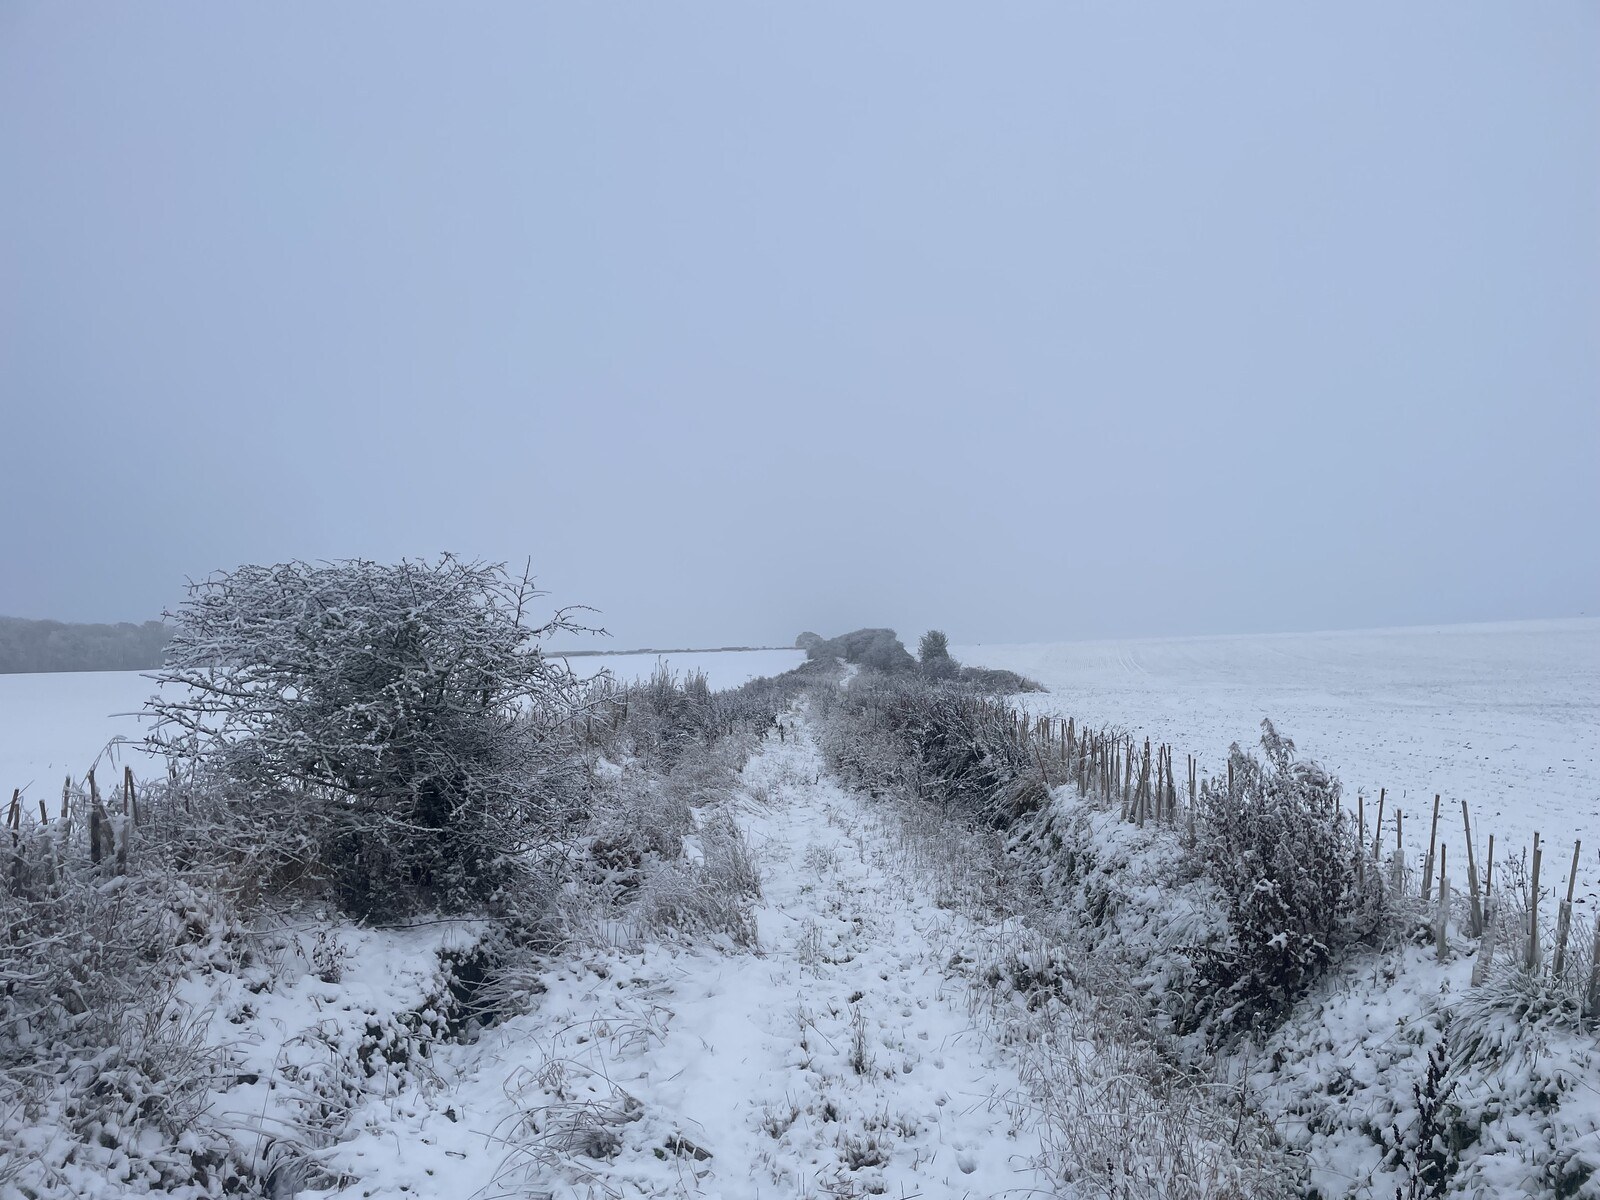 An overgrown path winding through snowy fields on both sides